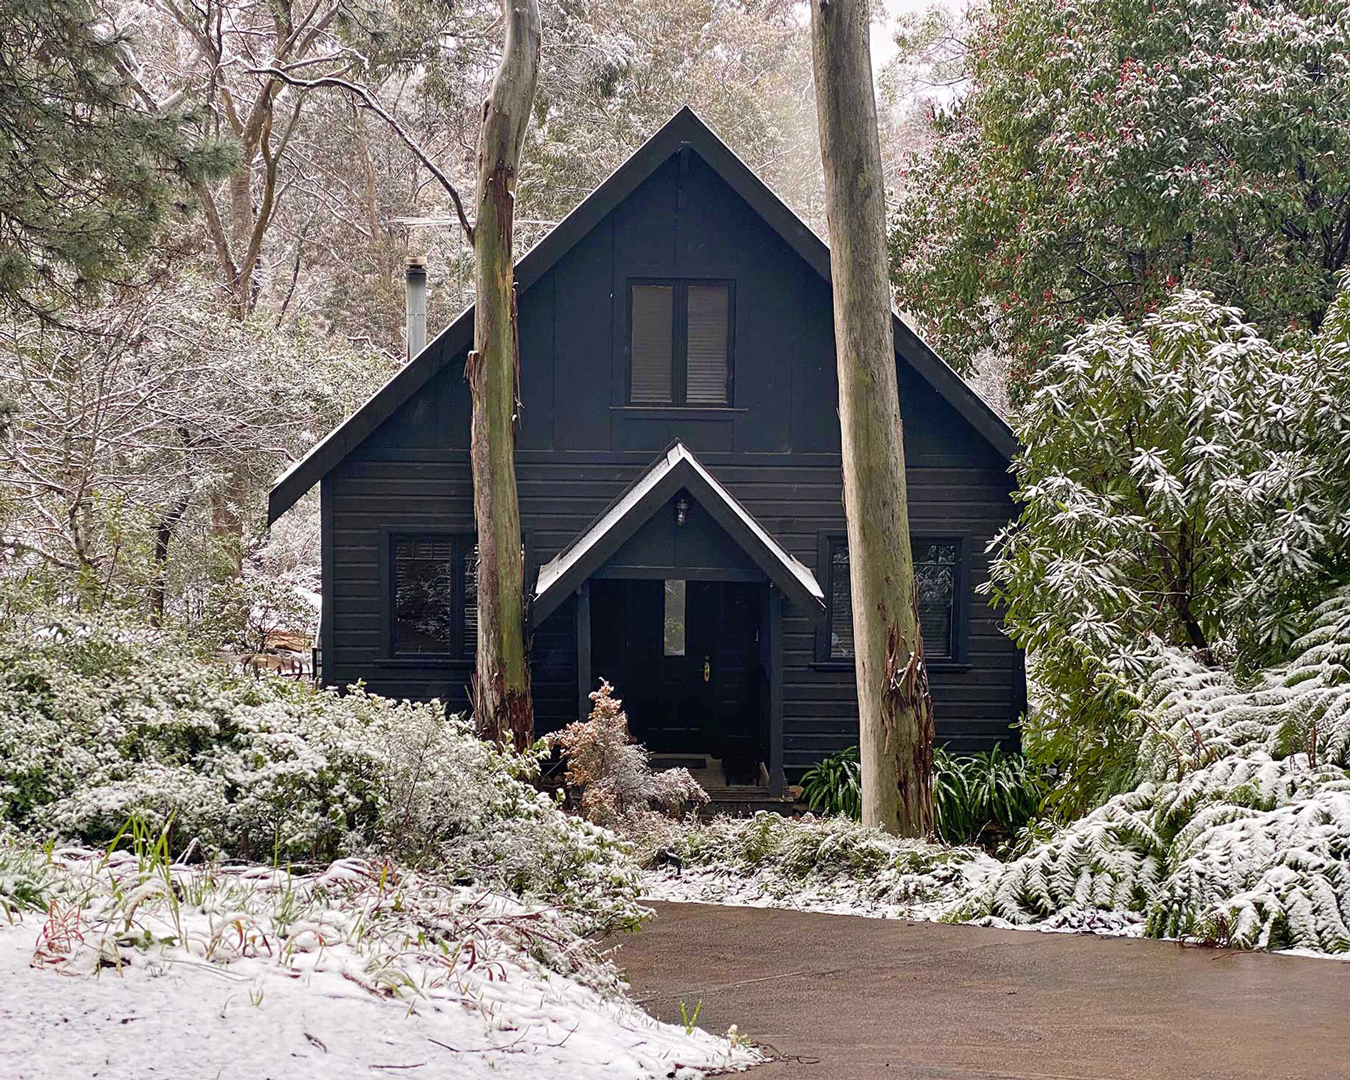 nsw places to visit in winter